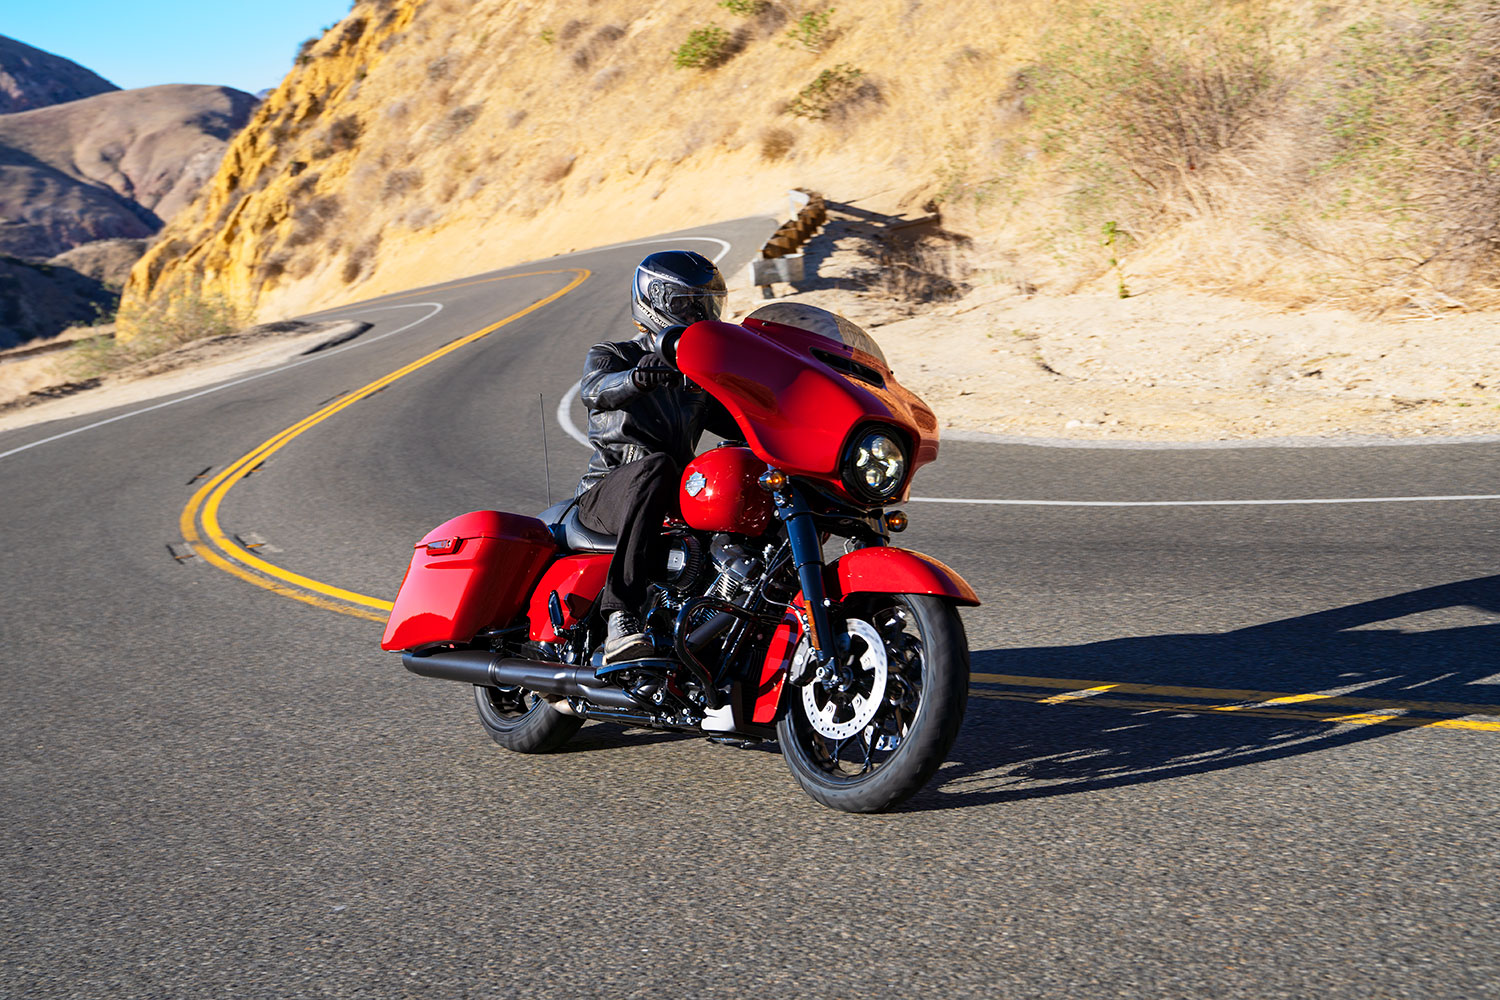 2022 Harley-Davidson Road Glide ST and Street Glide ST First Look